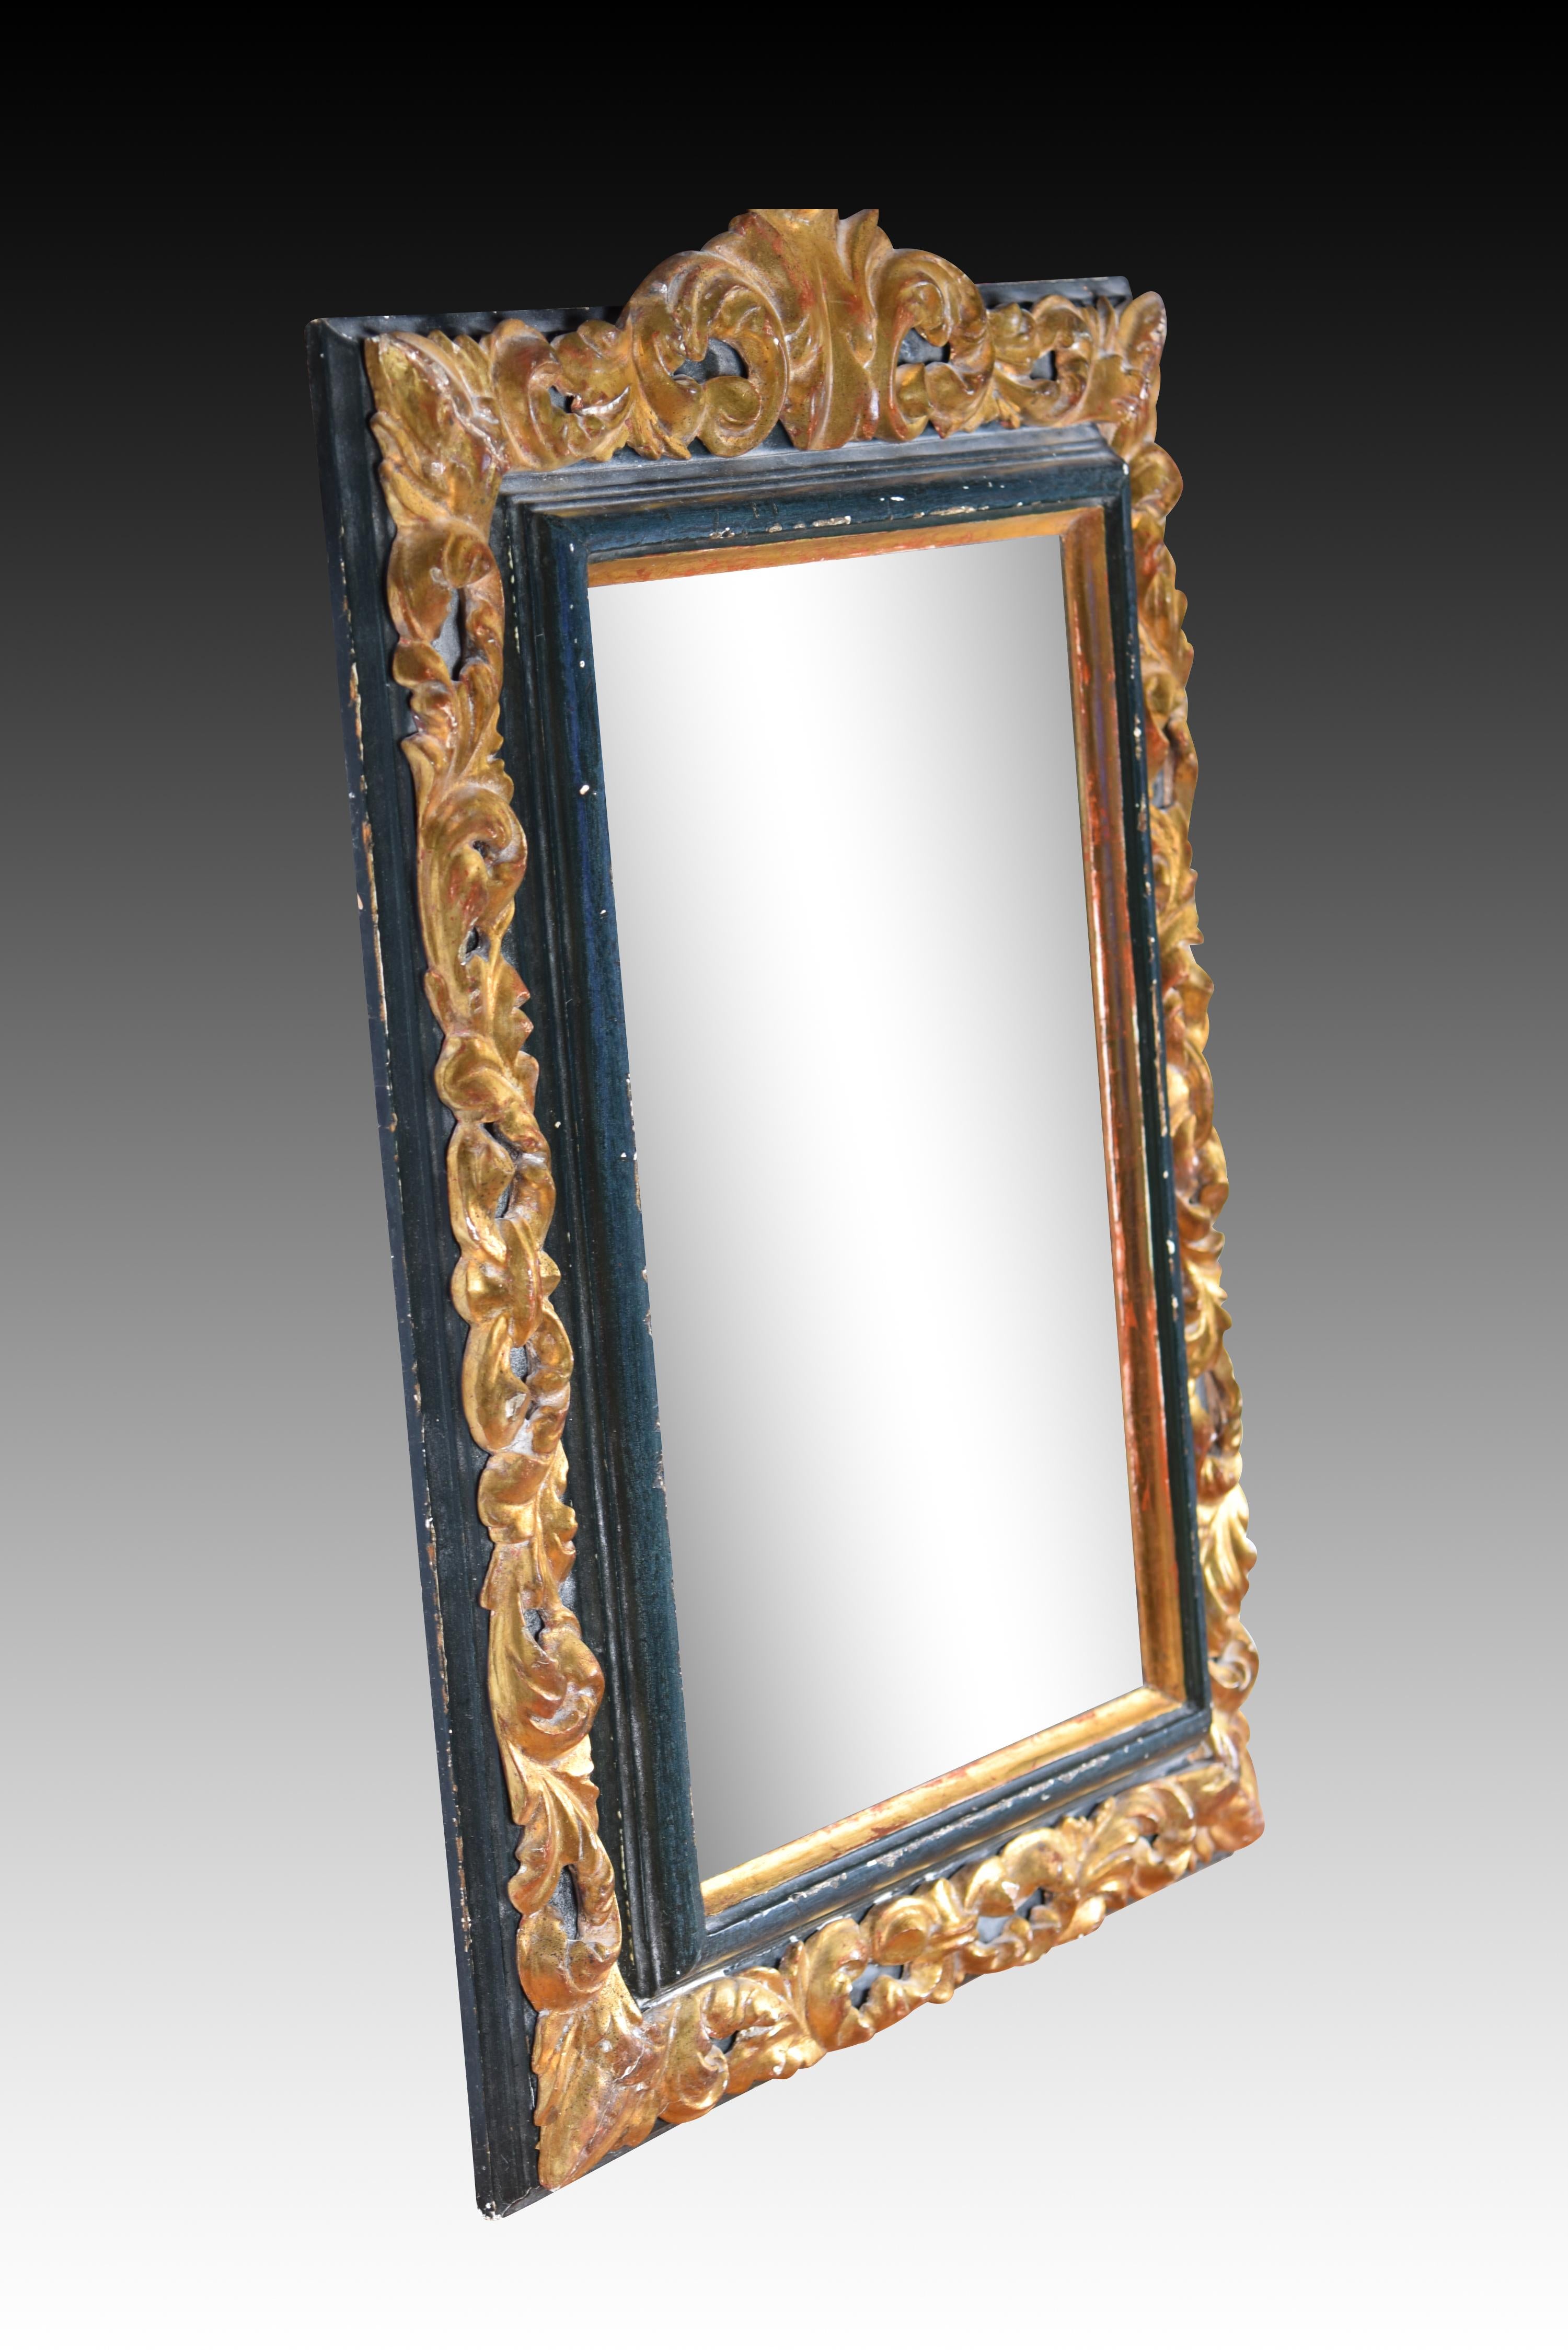 Mirror. Carved and polychrome wood. Spanish school, 20th century, following ancient models. 
Rectangular wall mirror made of wood and decorated with a composition based on plant elements in relief on the front, with a small crest on the top.